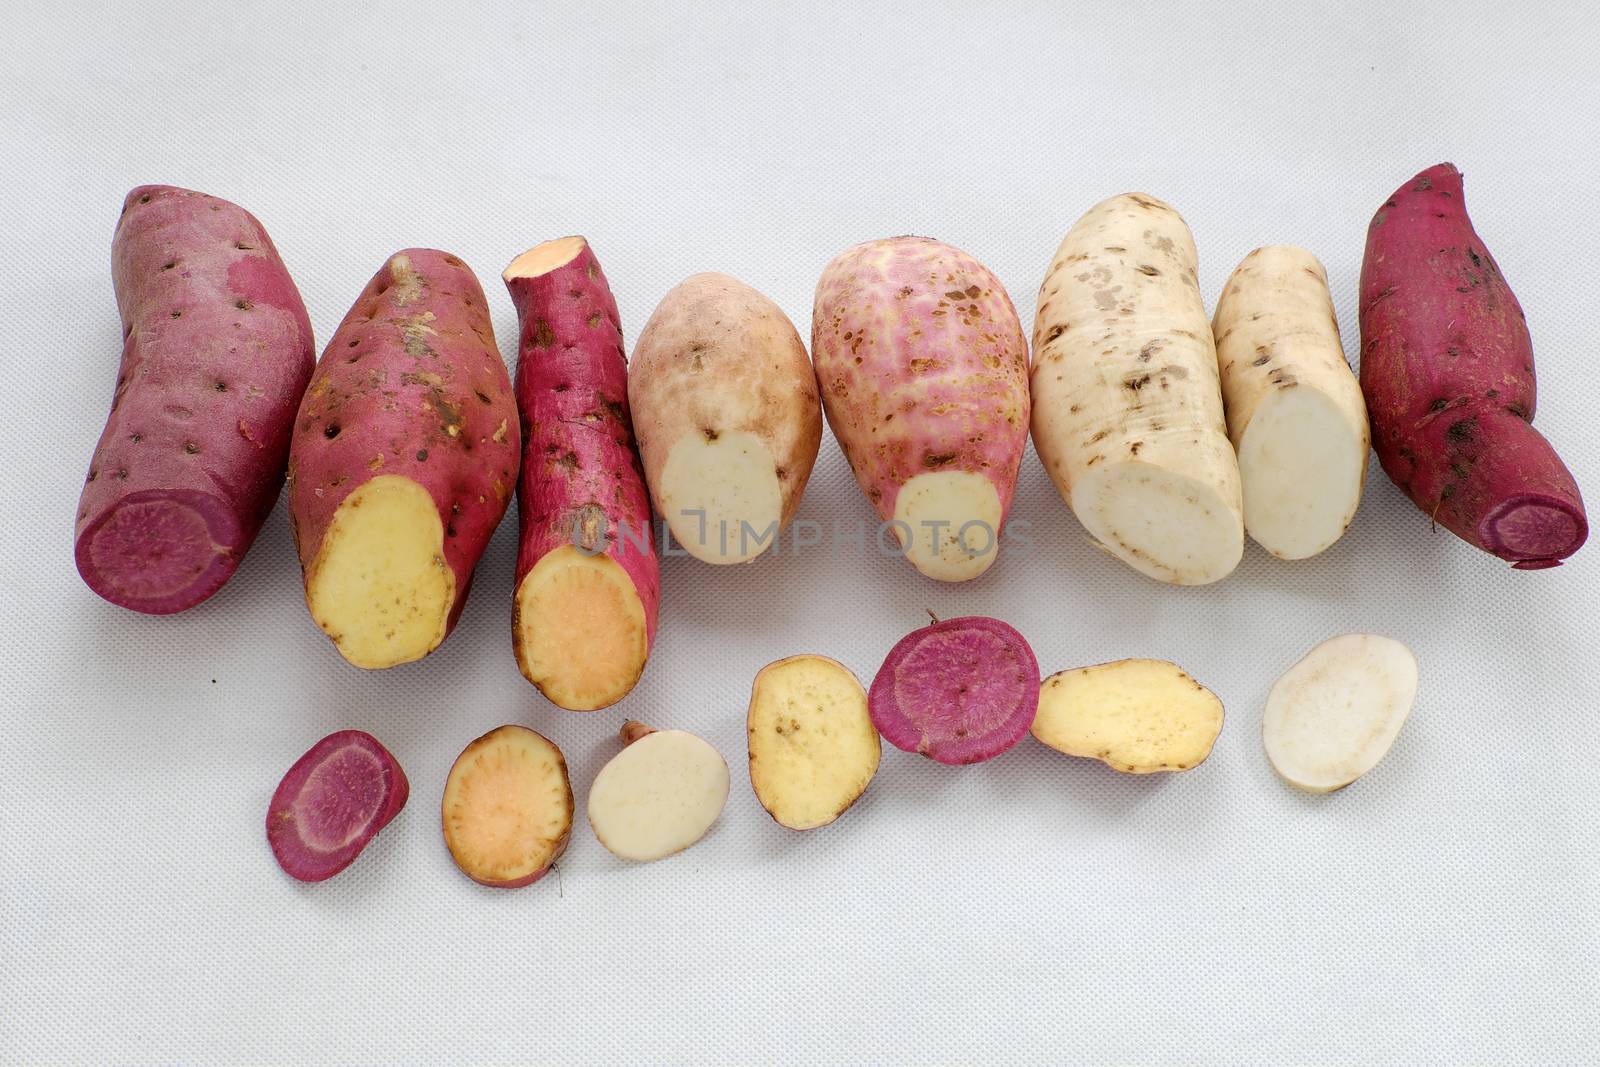 Diversity sweet potato on white background, healthy food that rich fiber, vitamin, starch and mineral, this cereal absorb toxin, fat so good for digestive system